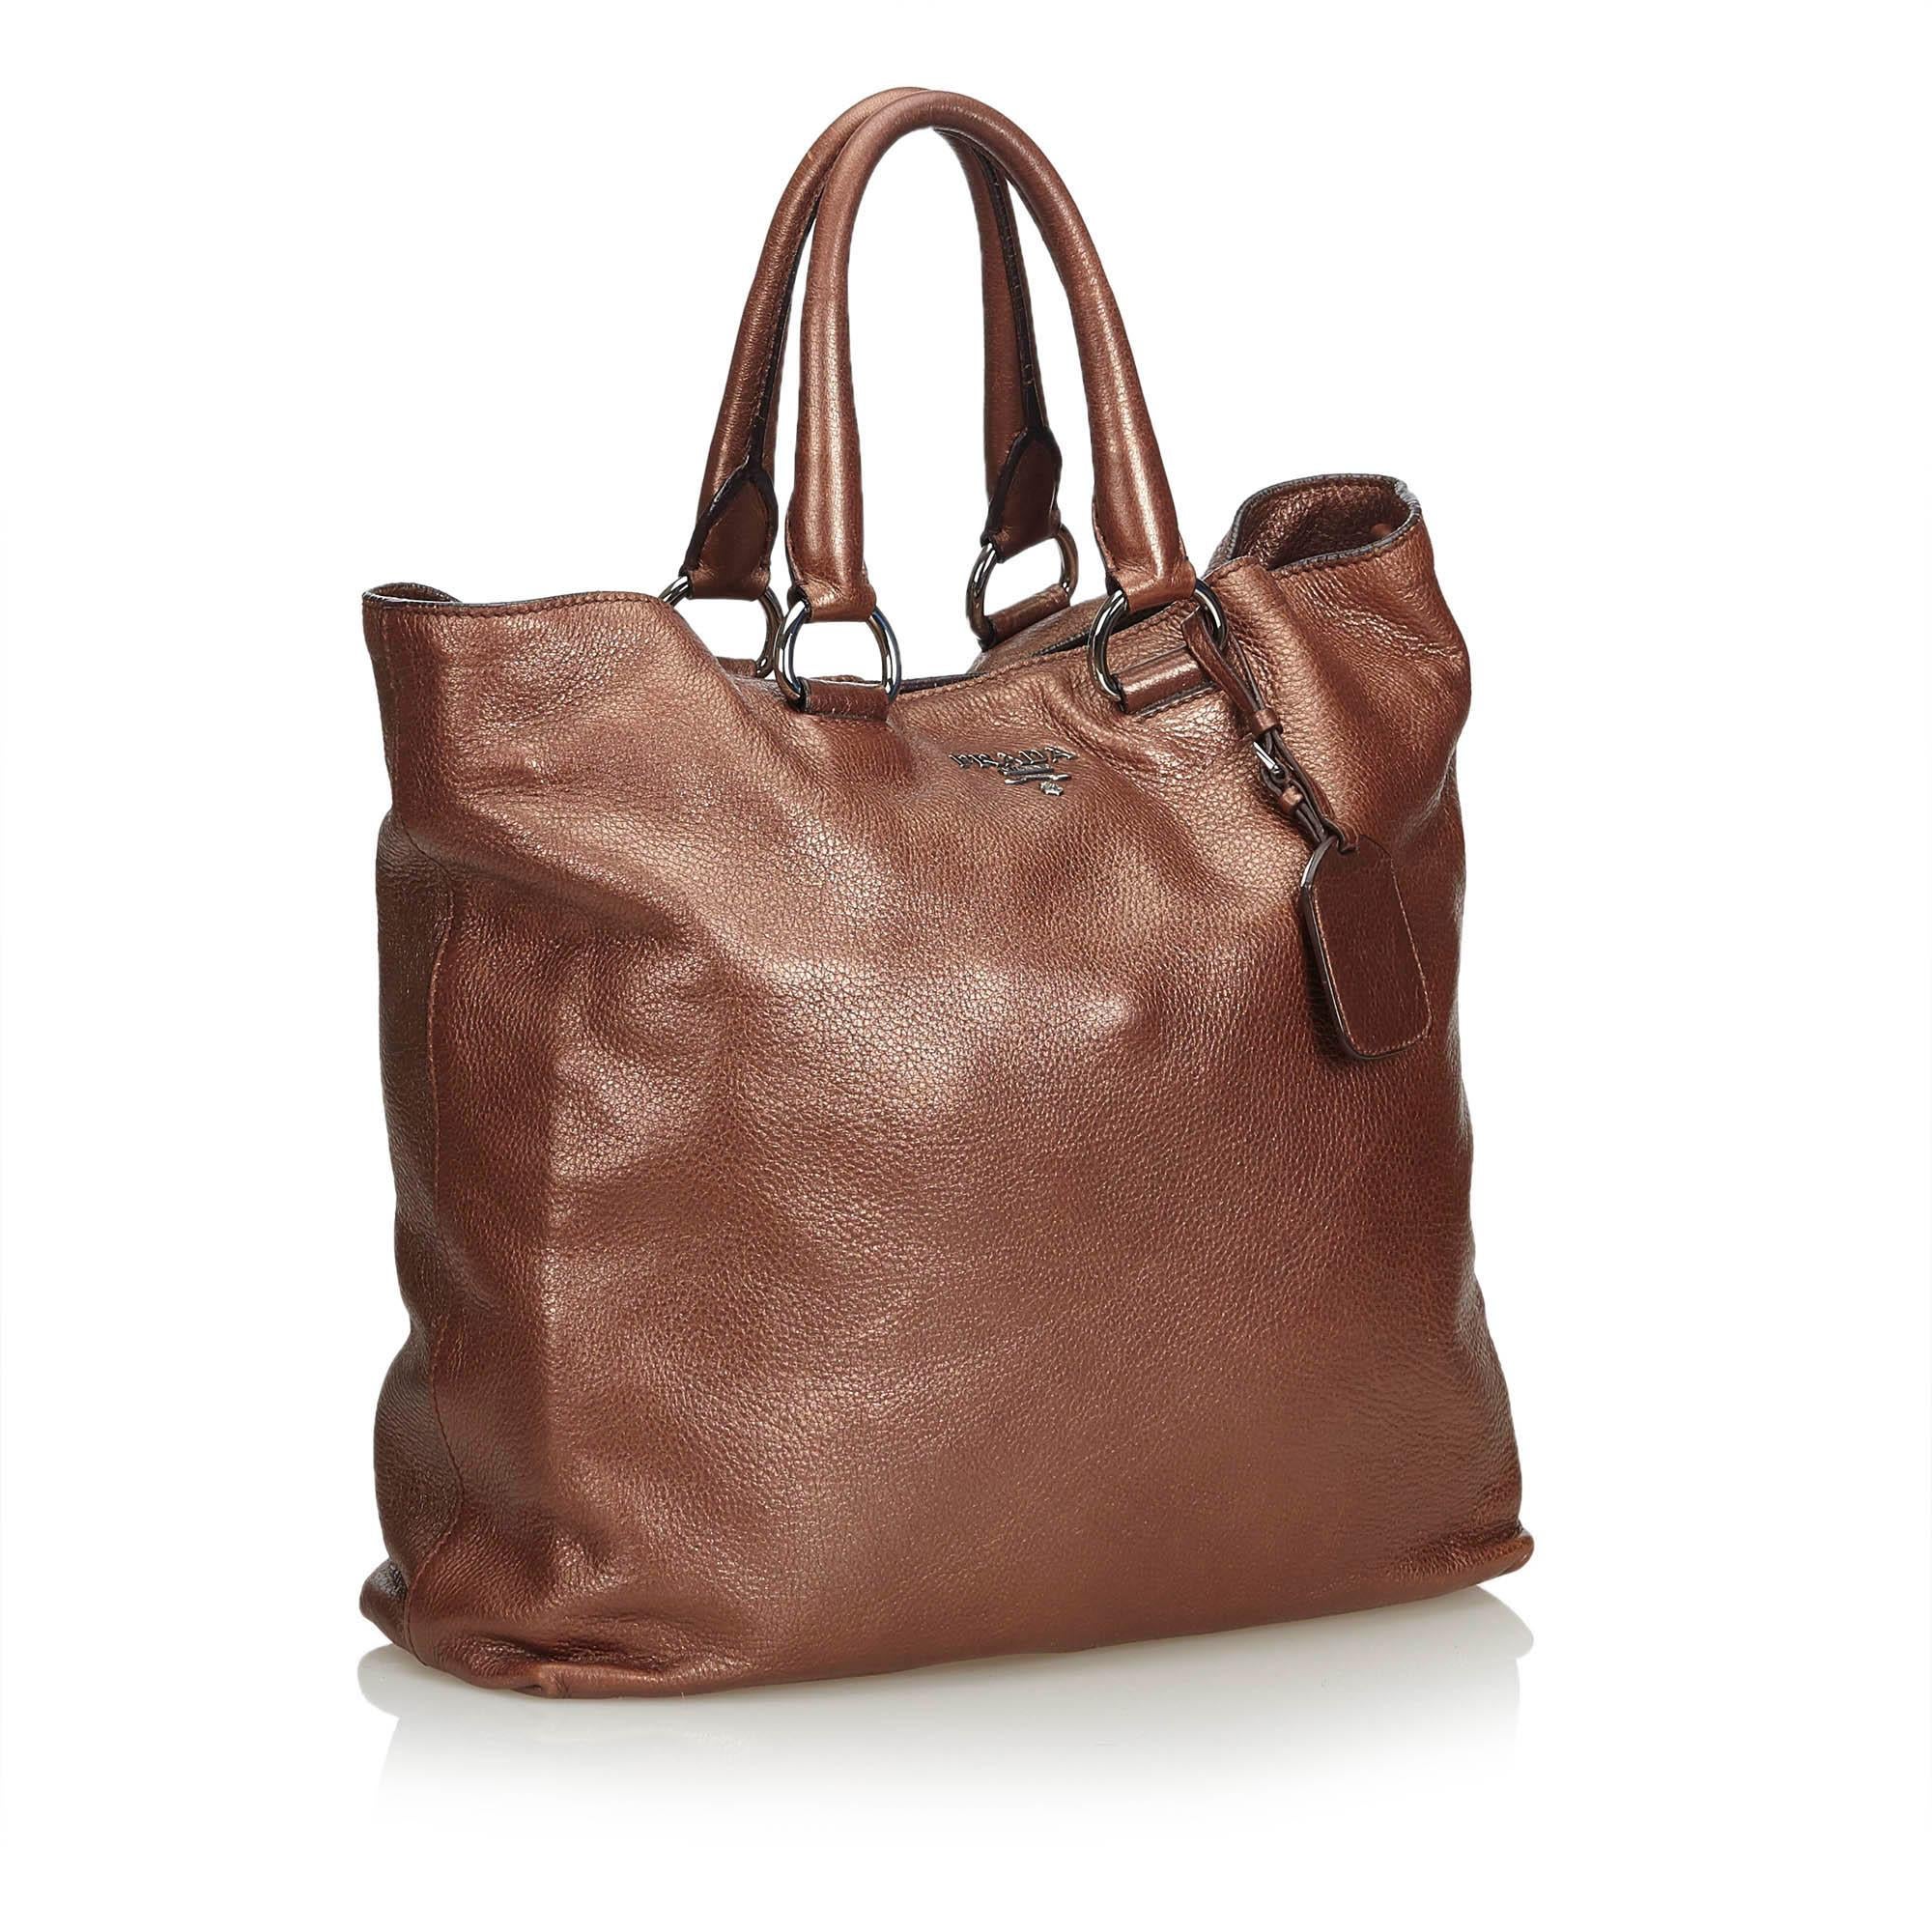 This tote bag features a leather body, flat leather straps, an open top with a magnetic clasp closure, and interior zip and slip pockets. It carries as B+ condition rating.

Inclusions: 
Dust Bag
Authenticity Card
Dimensions:
Length: 34.00 cm
Width: